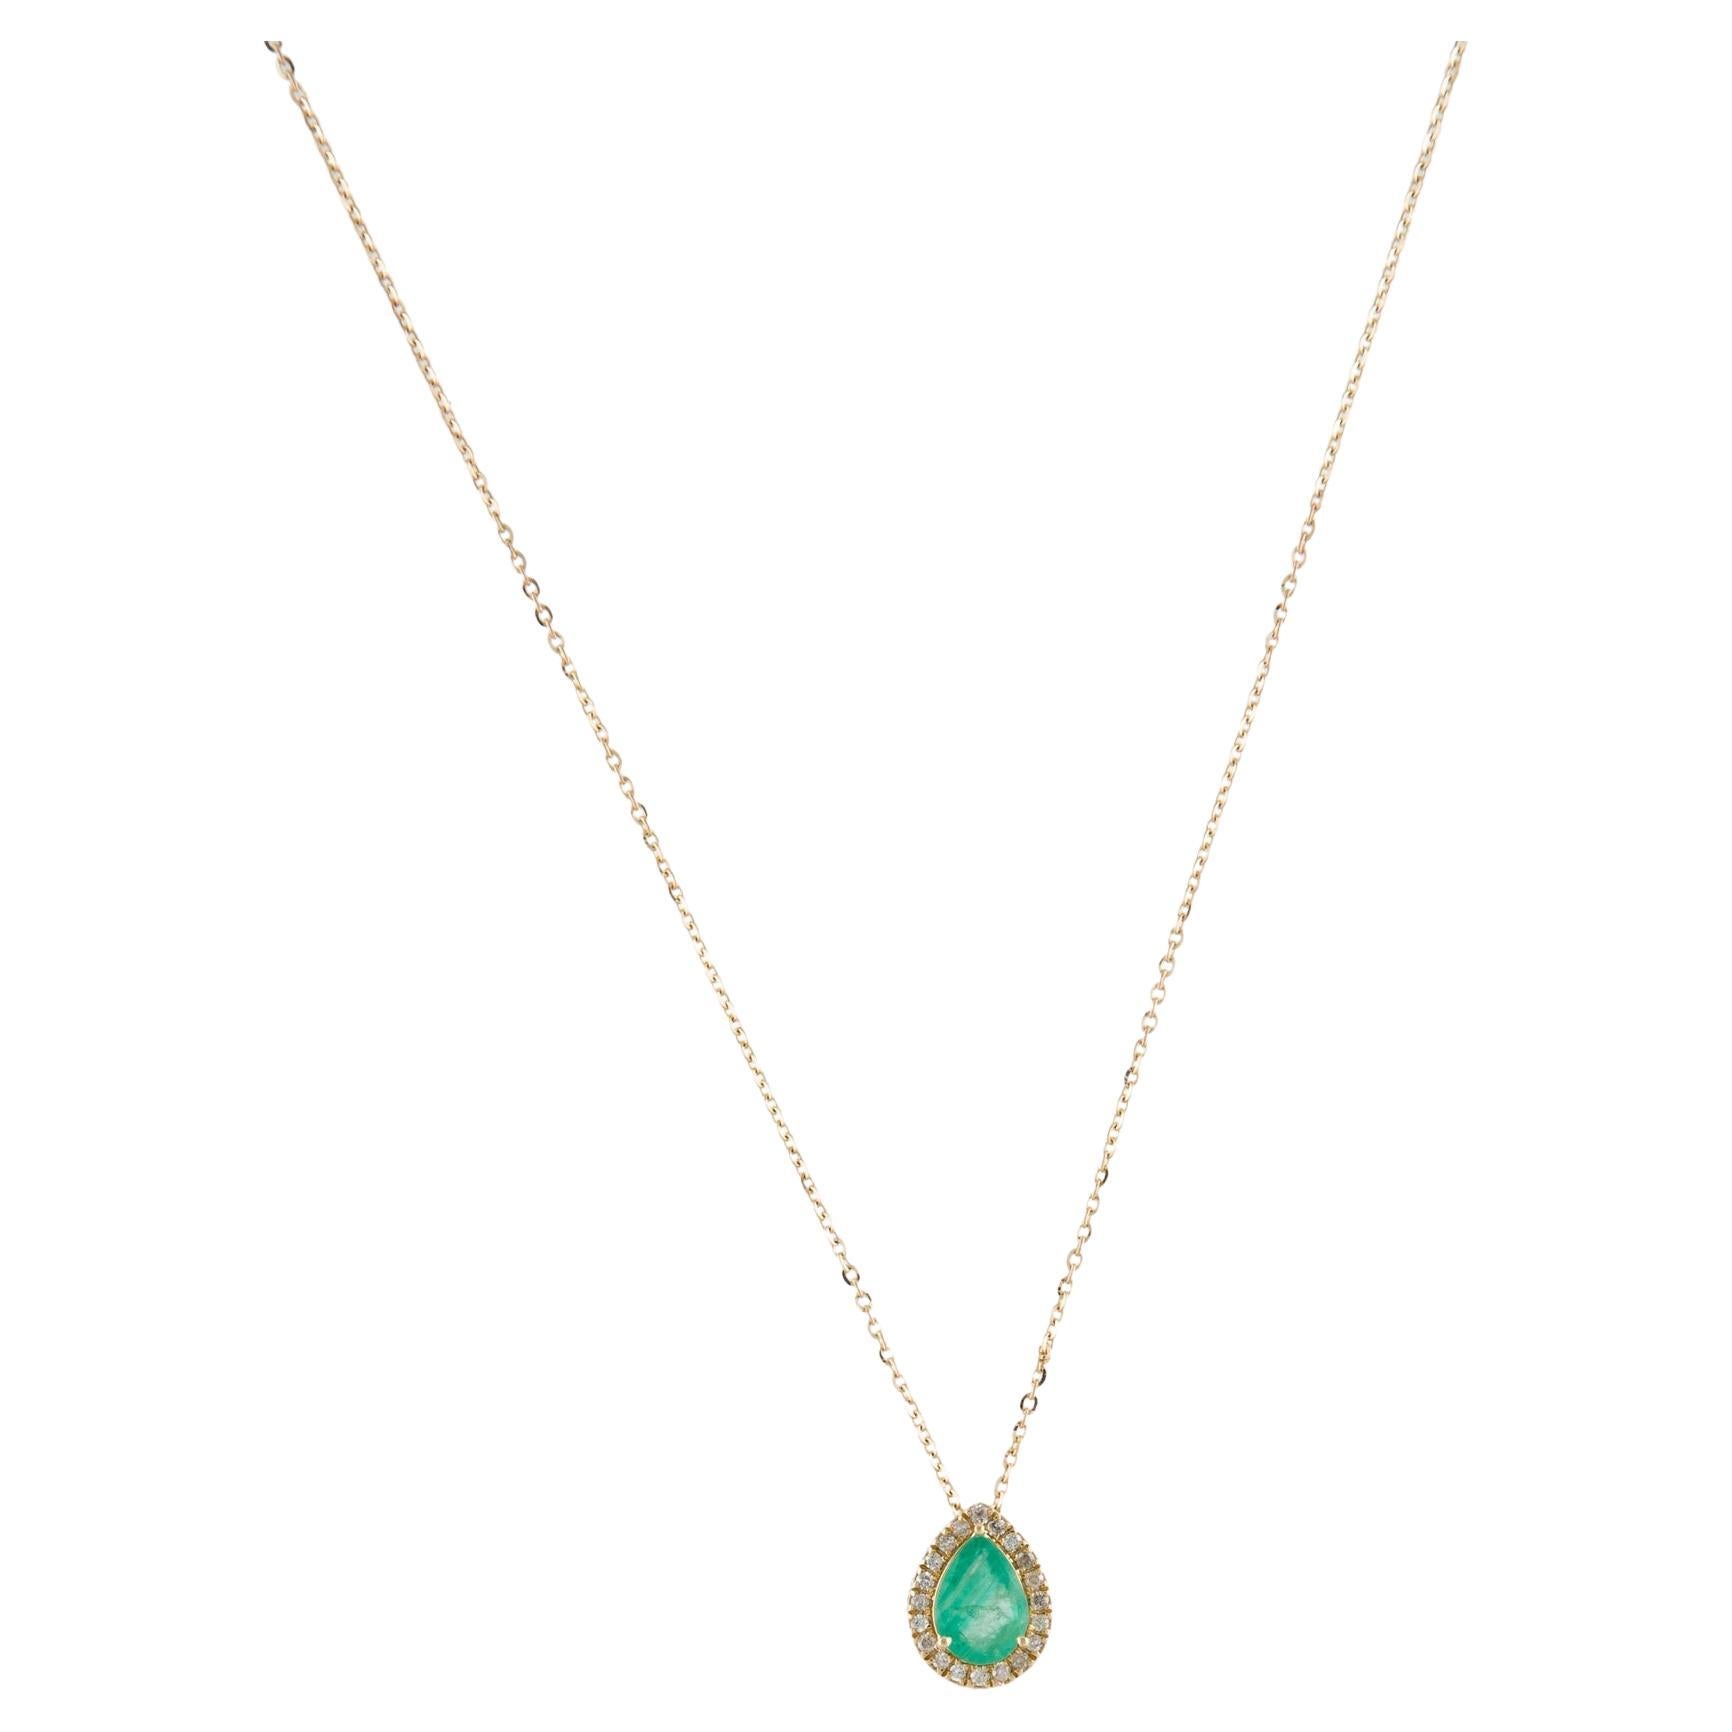 14K Emerald & Diamond Pendant Necklace - Exquisite Jewelry for Timeless Elegance For Sale